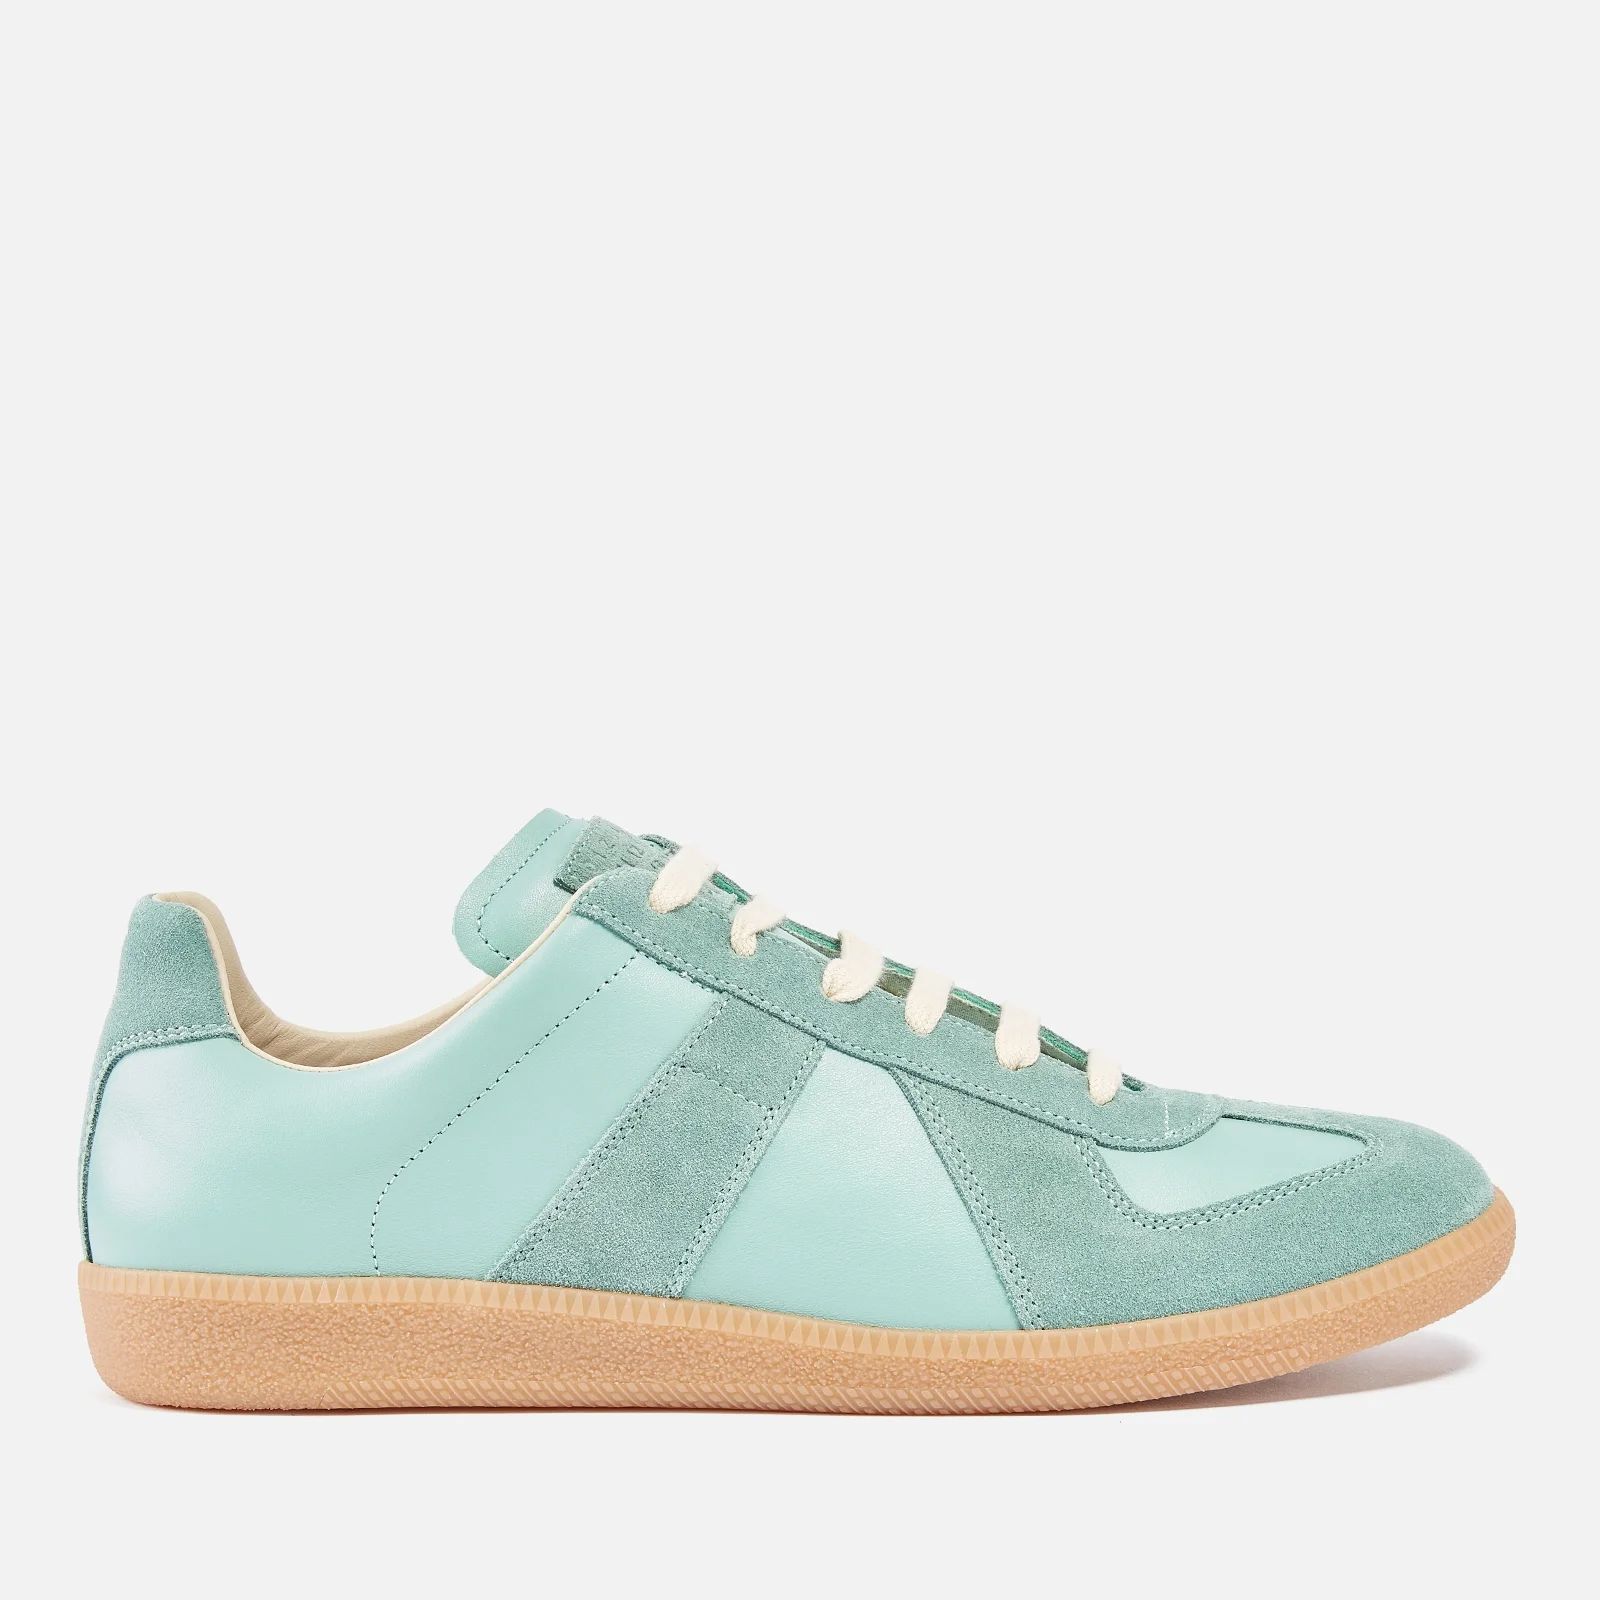 Maison Margiela Men's Replica Nappa Leather and Suede Trainers Image 1